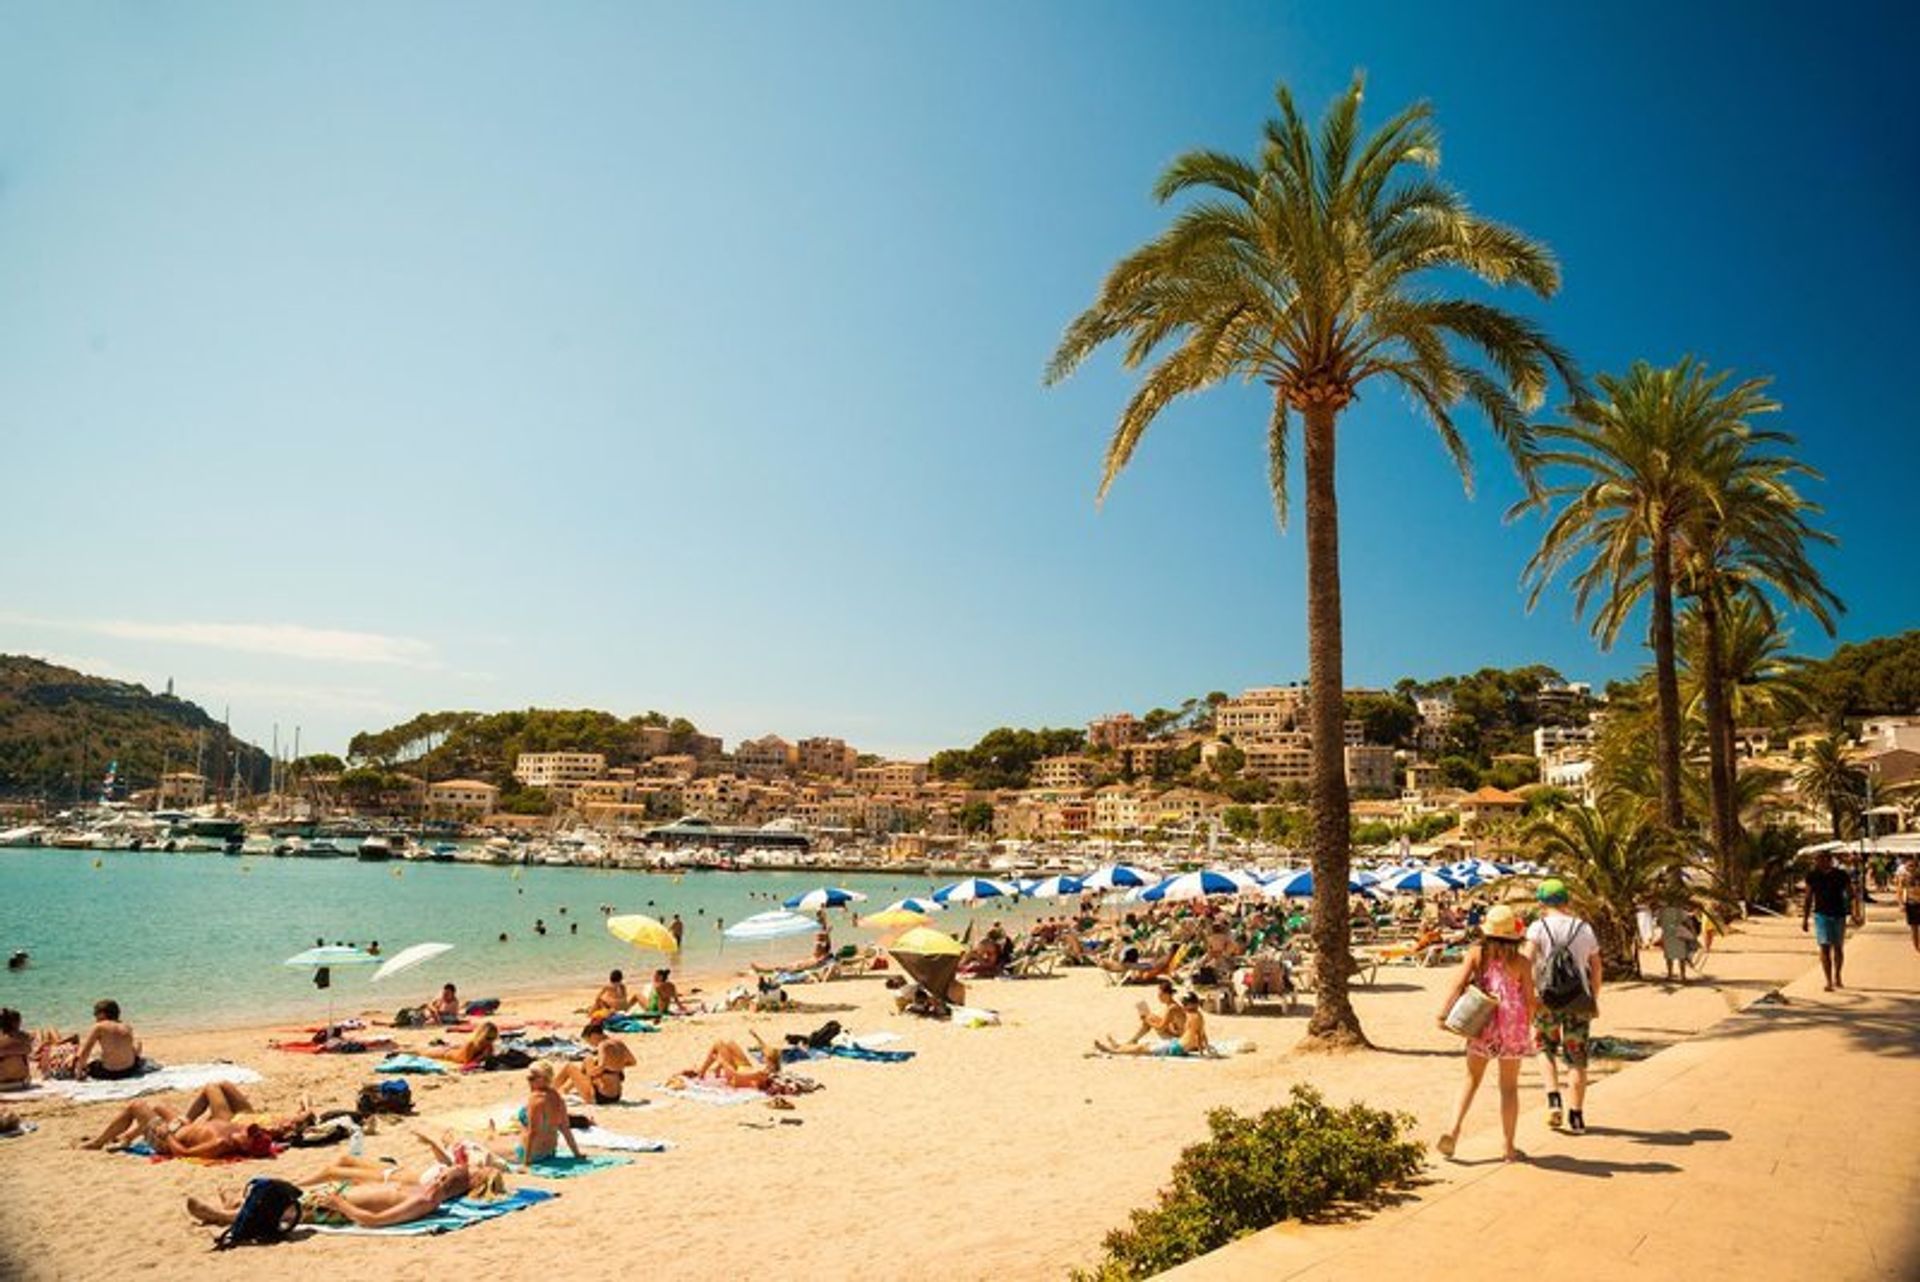 Lively Port de Soller beach in the north west coast of Majorca